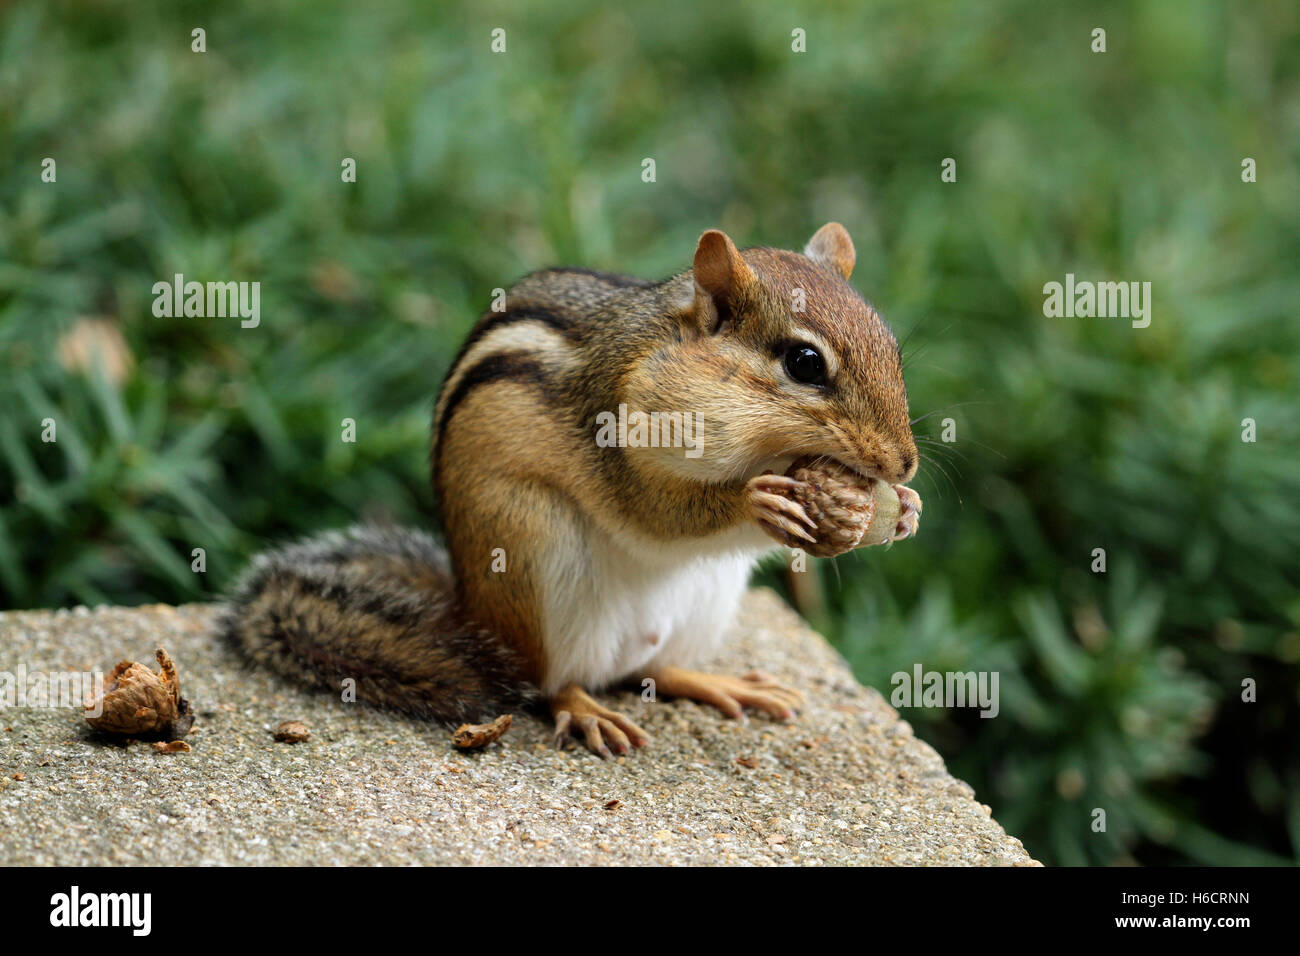 Close-up of Eastern chipmunk (Tamias striatus) with bulging cheeks eating an acorn Stock Photo